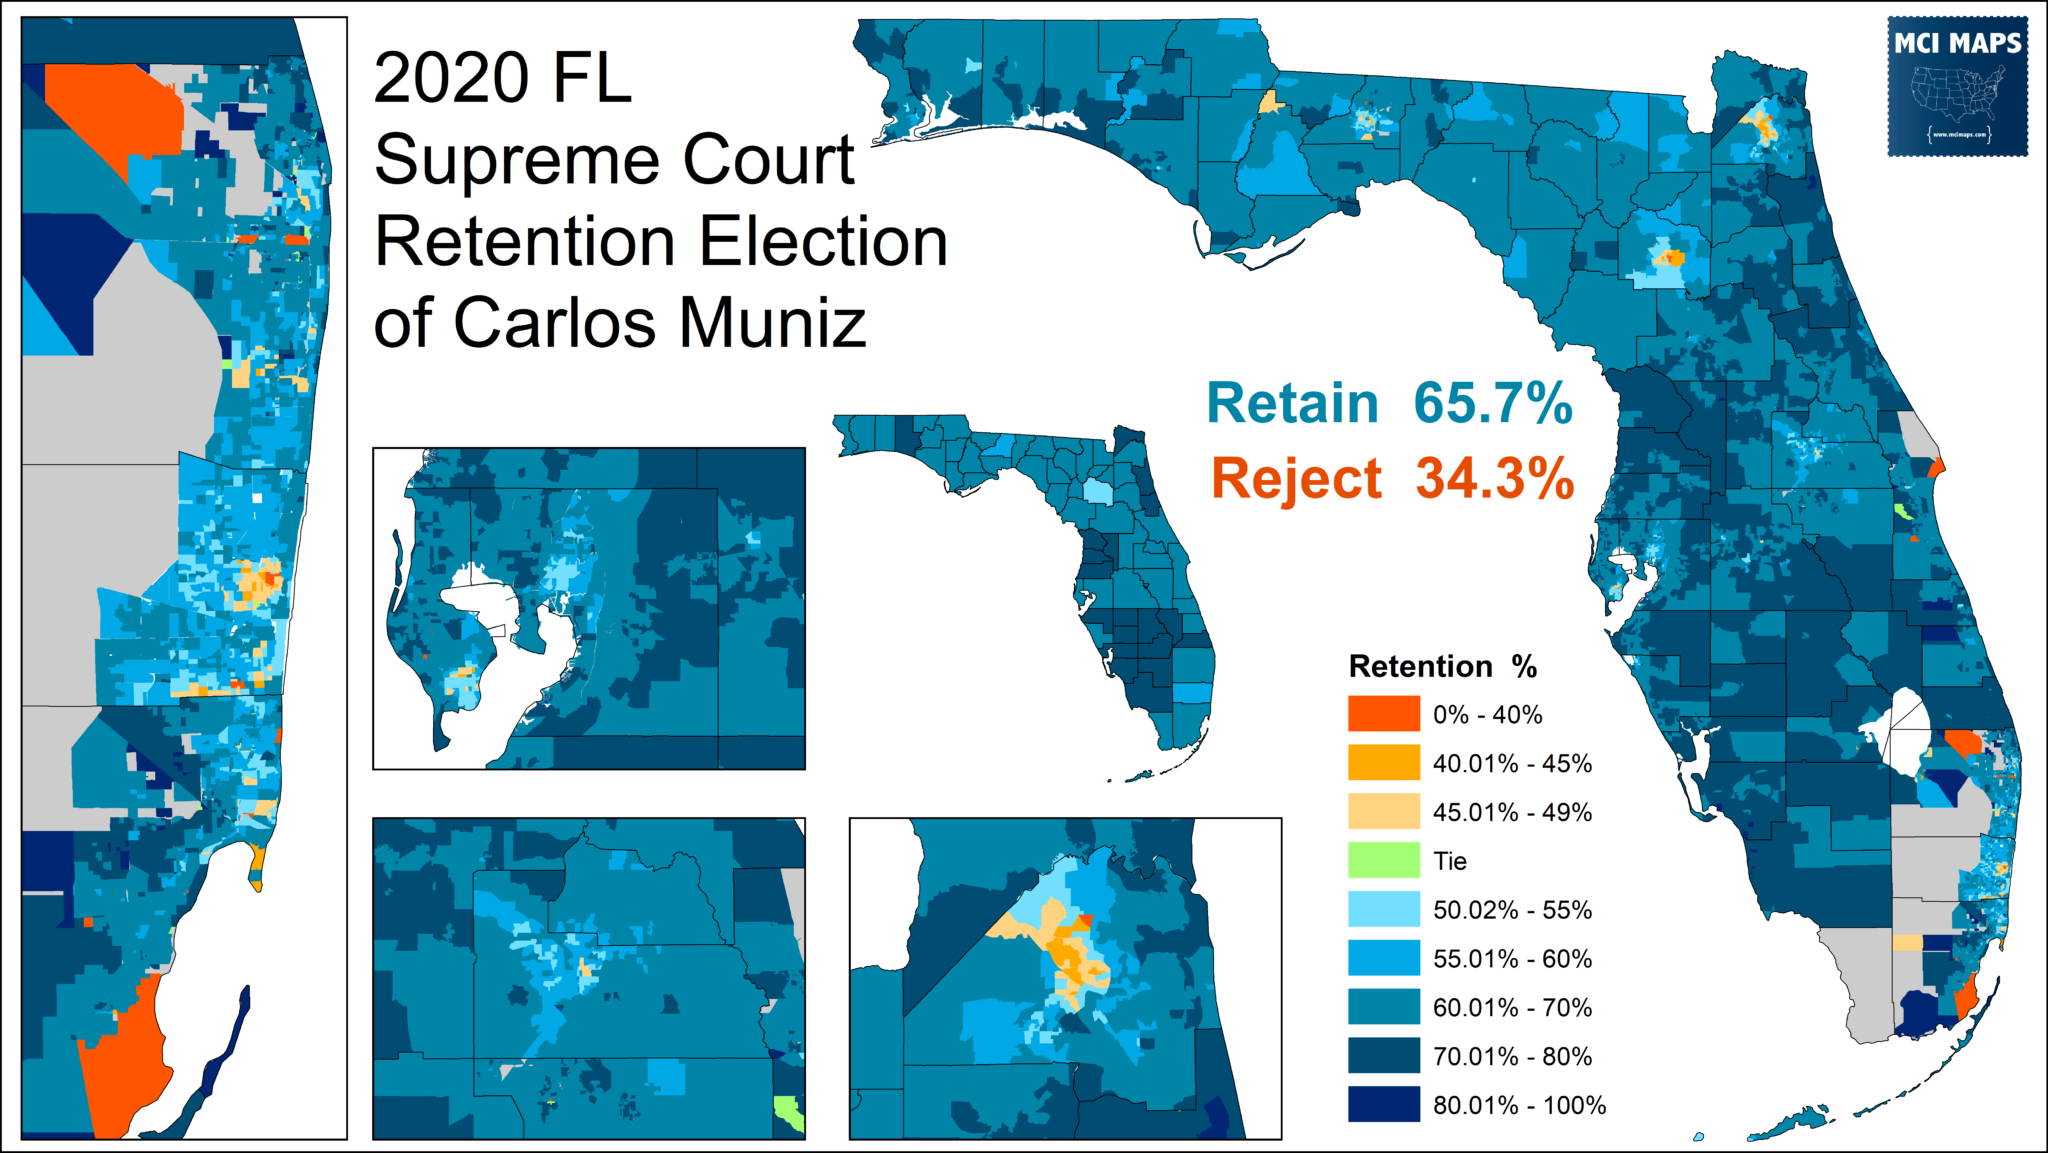 Florida Redistricting Preview #10: The State of Play for 2022 MCI